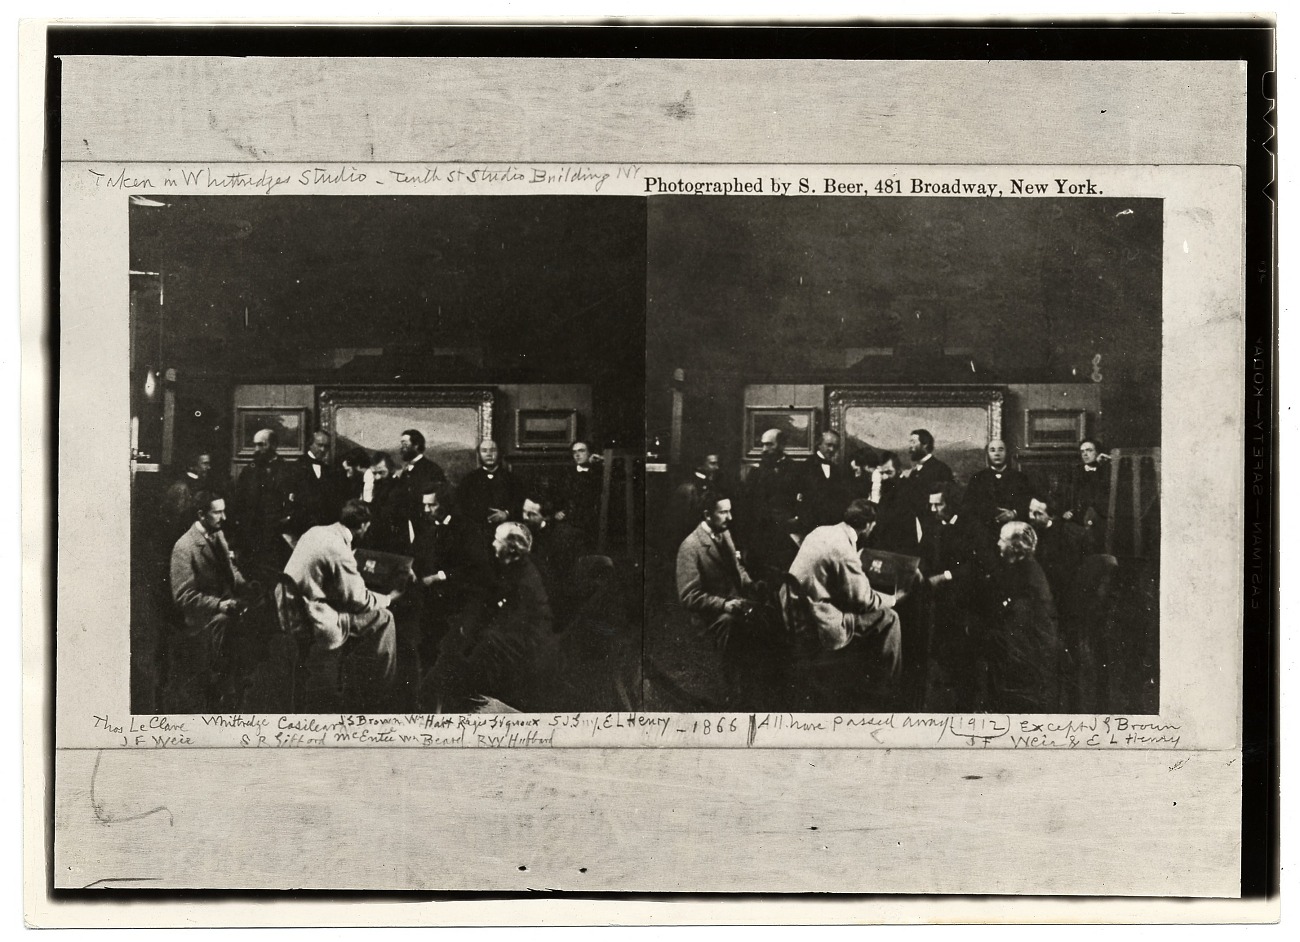 Black-and-white stereoview of a group of well-dressed men engaged in conversation in a high-ceilinged room filled with paintings. 